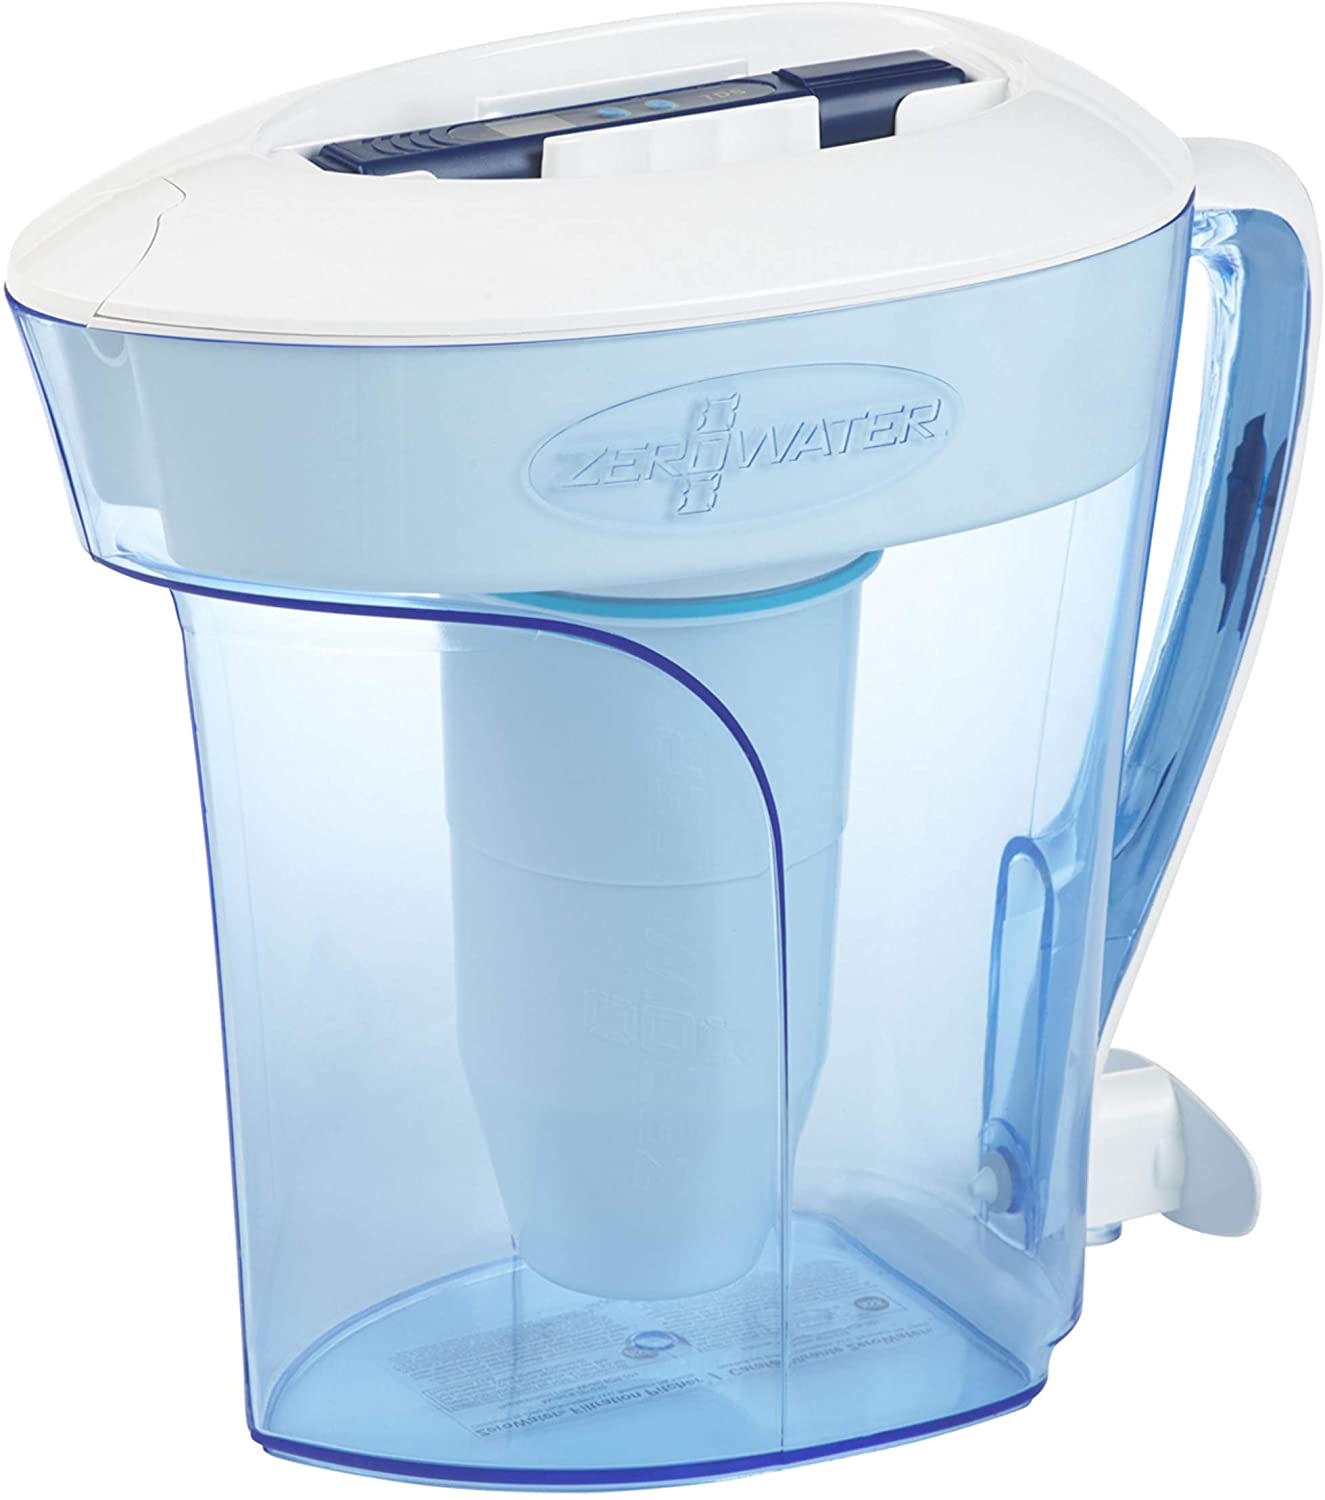 The 10 Best Water Pitcher Filters of 2021